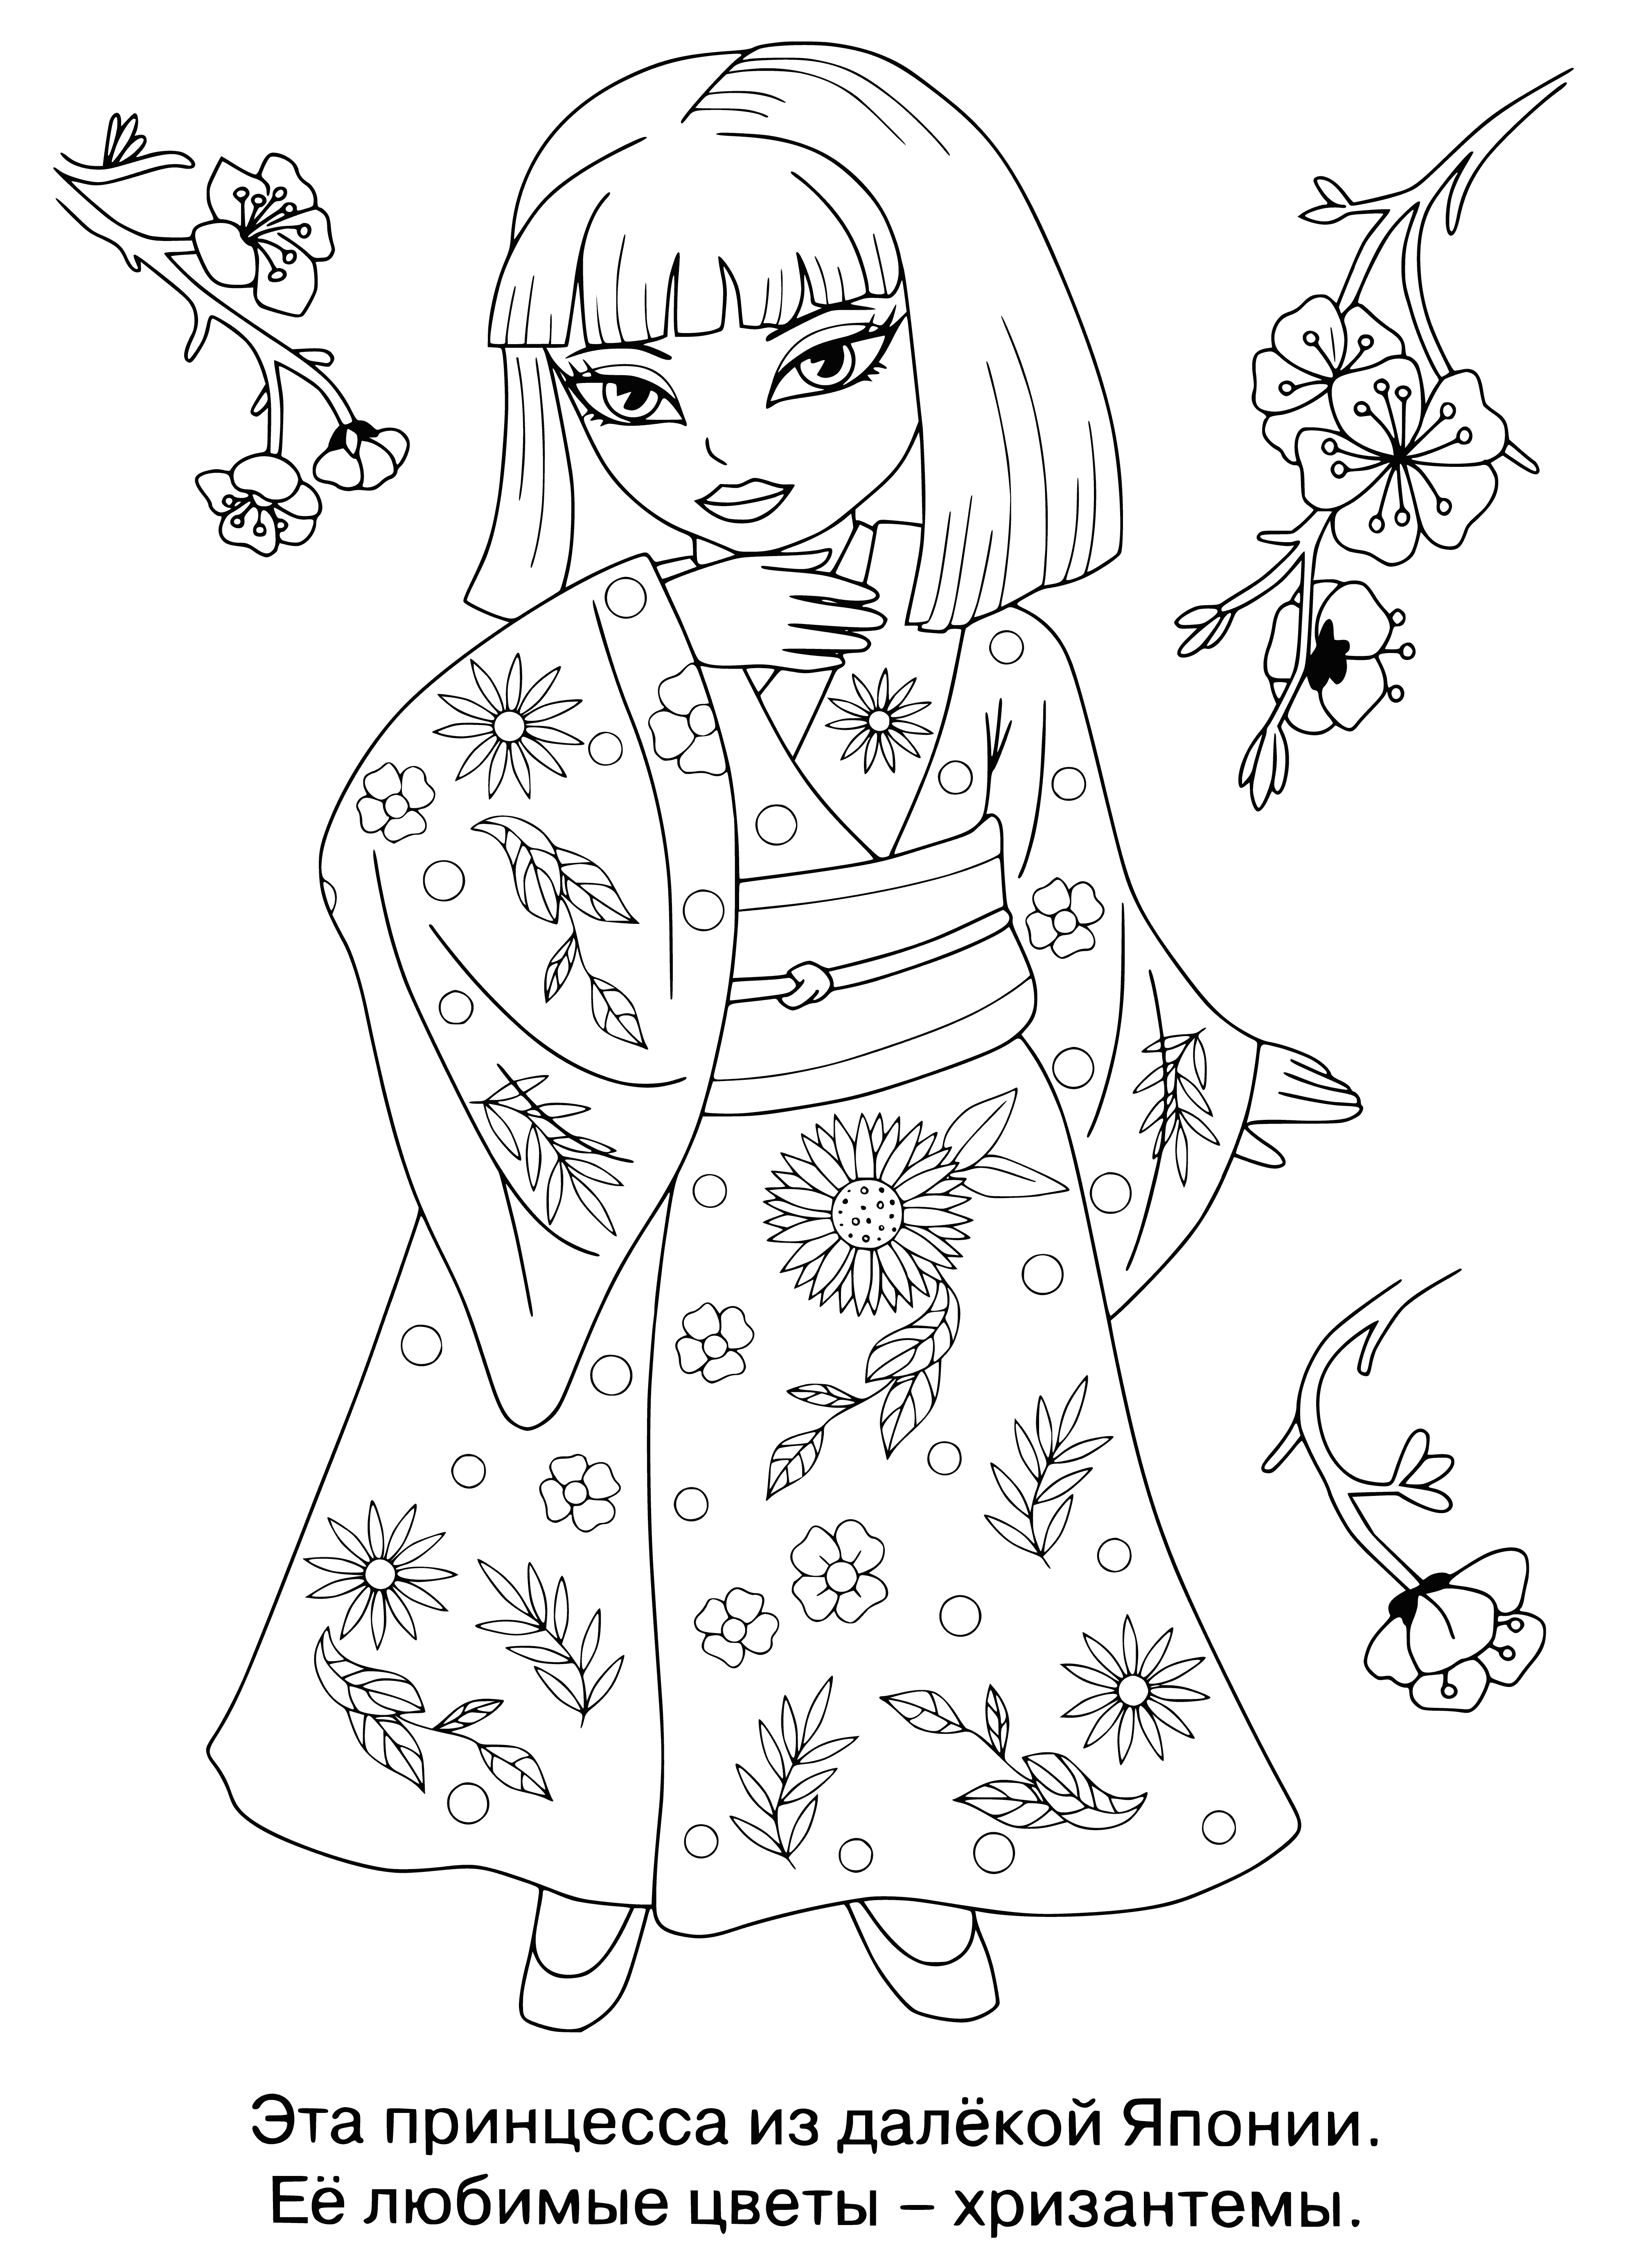 Princess from Japan coloring page